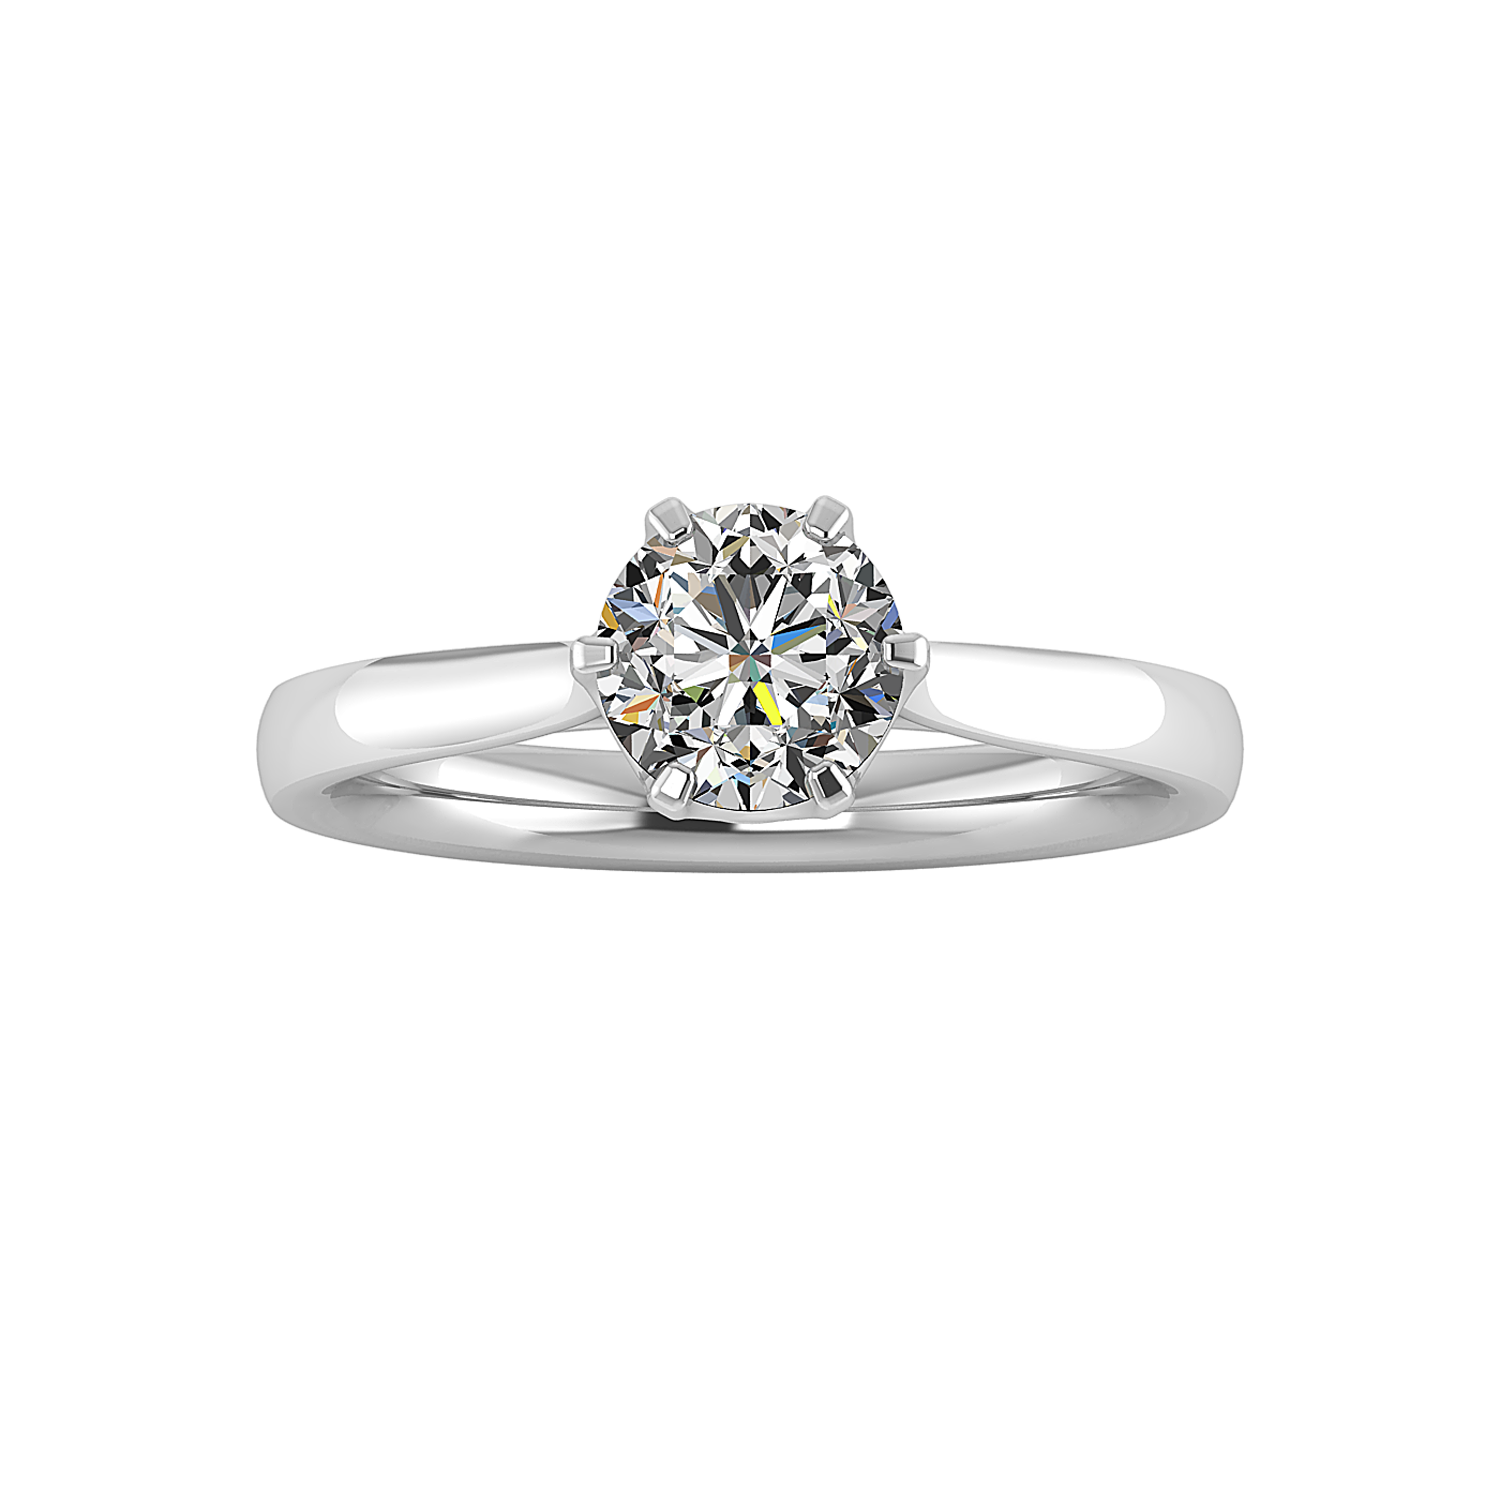 Korman Signature Isabelle Royal Solitaire Semi Mount Engagement Ring